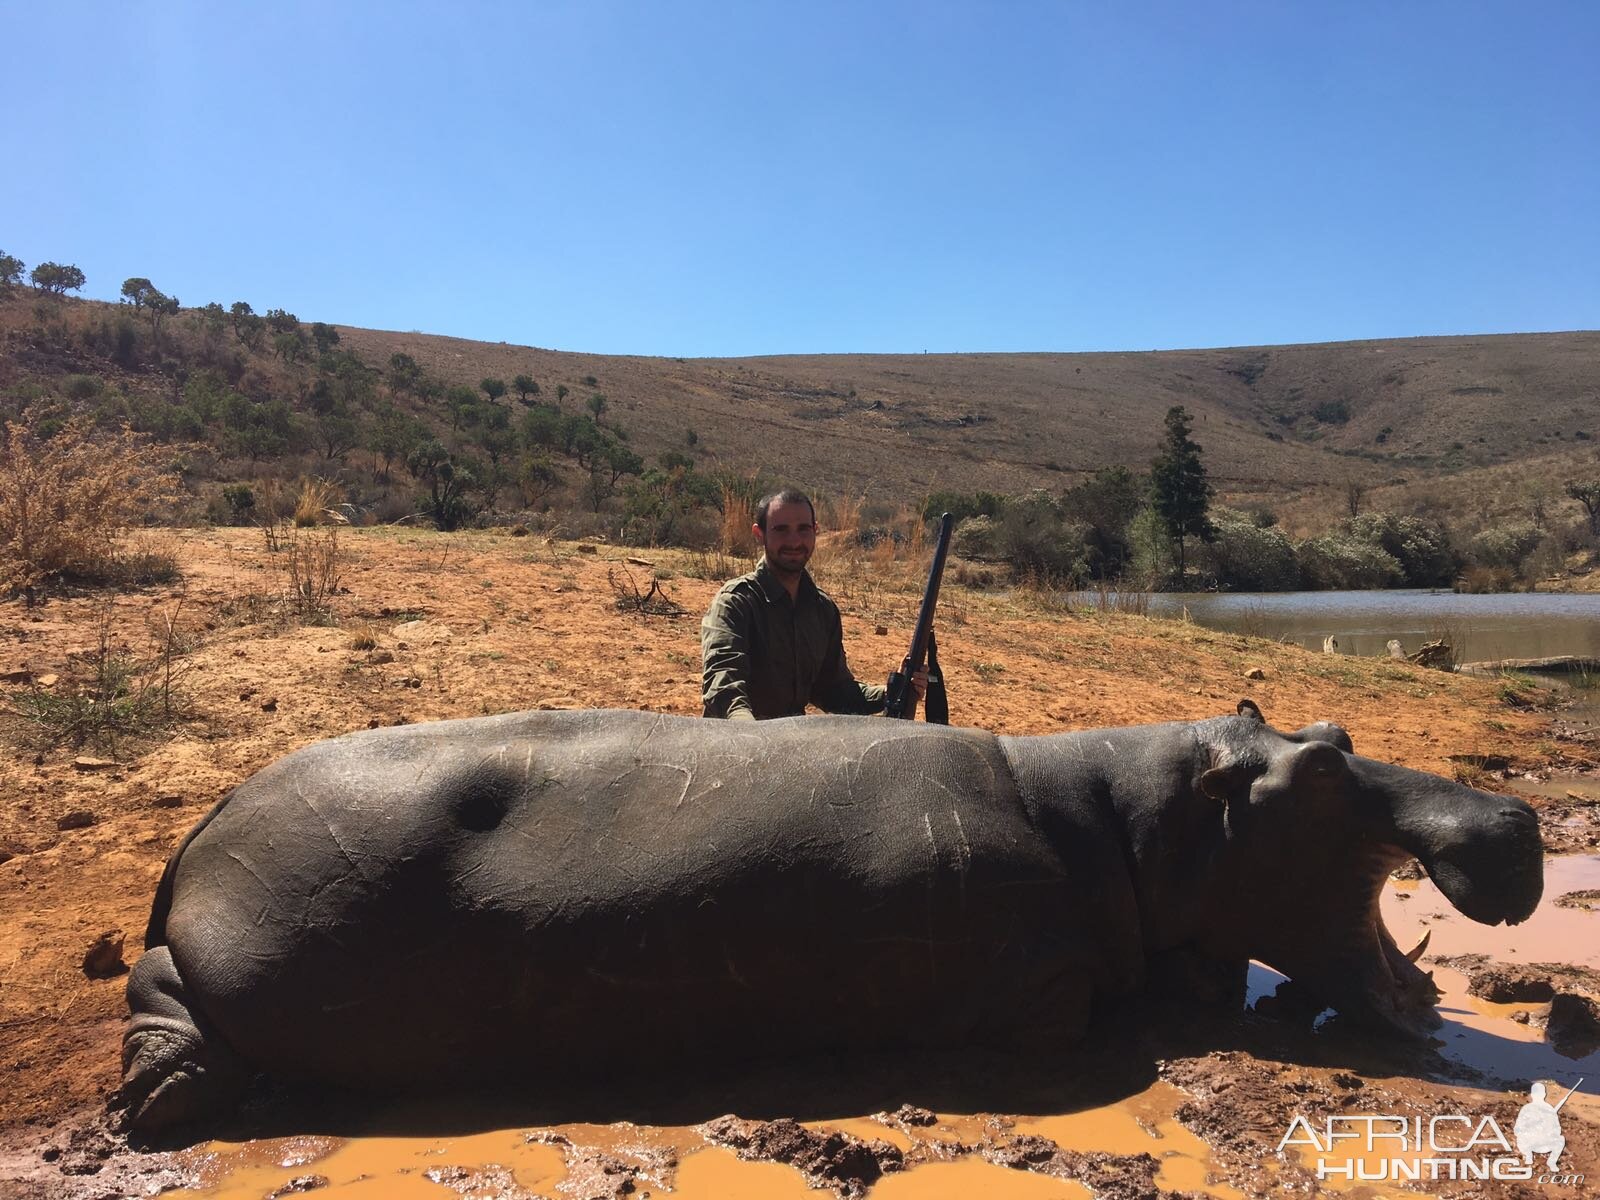 Hippo from South Africa